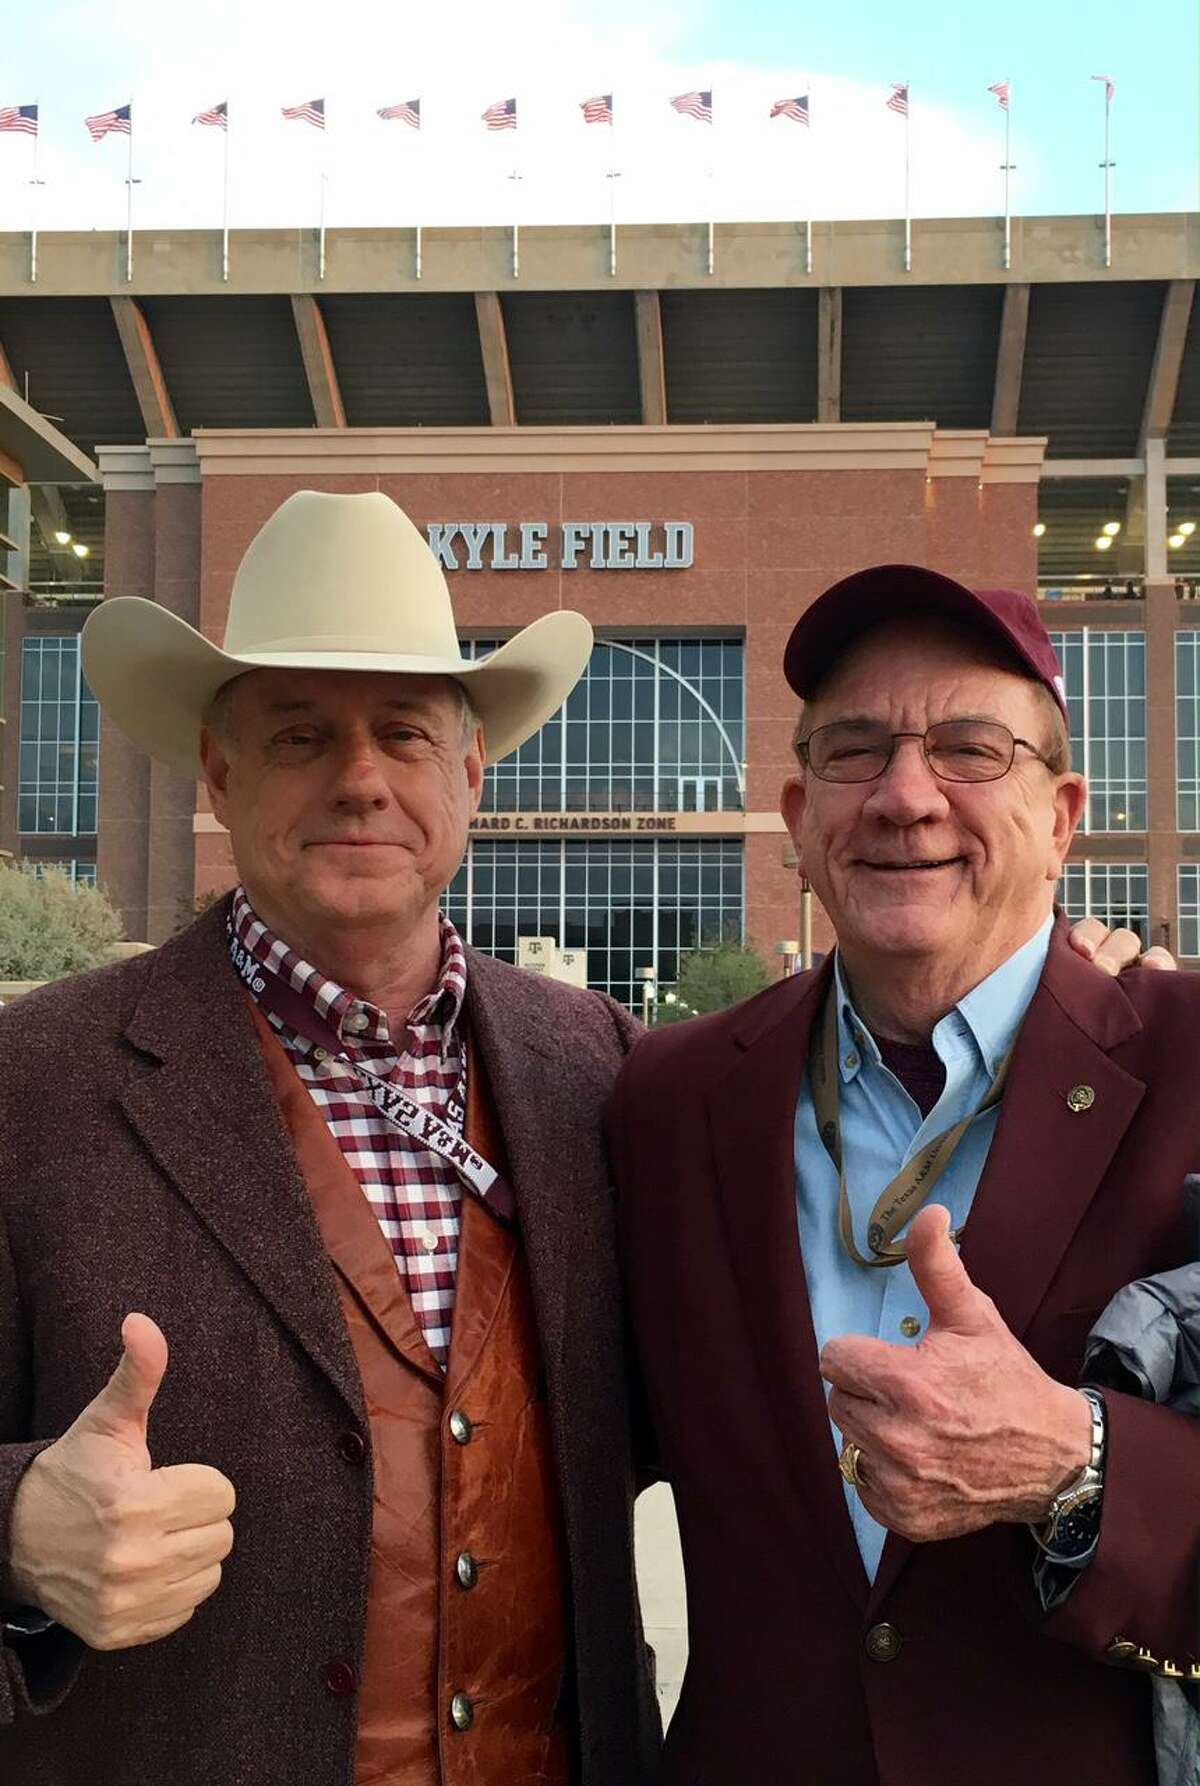 Jim Schwertner (left) and Richard Box, instrumental in Texas A&M' s move to the SEC, outside of Kyle Field.